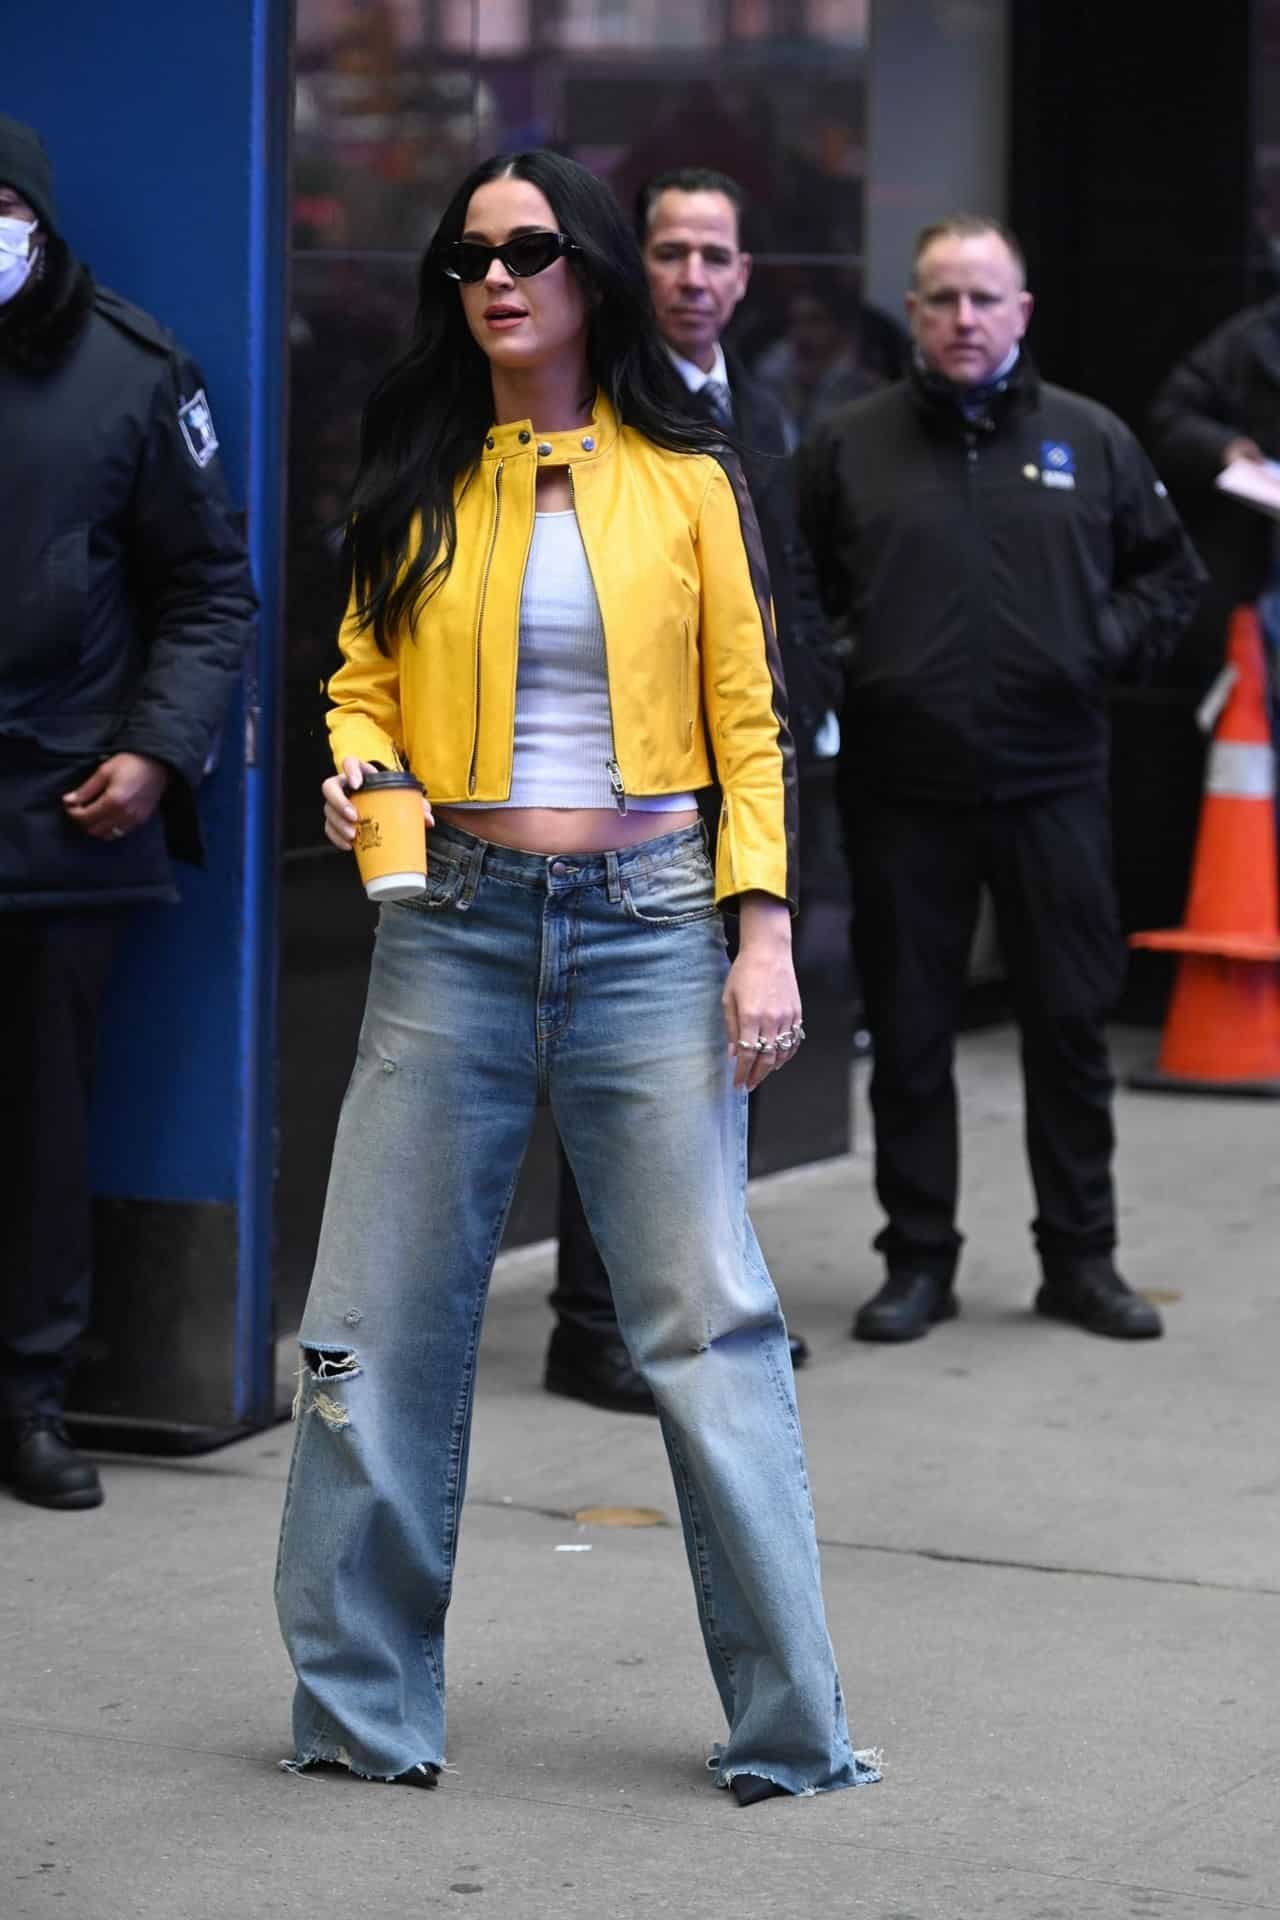 Katy Perry in Cropped Yellow Leather Jacket and Baggy Jeans in NYC